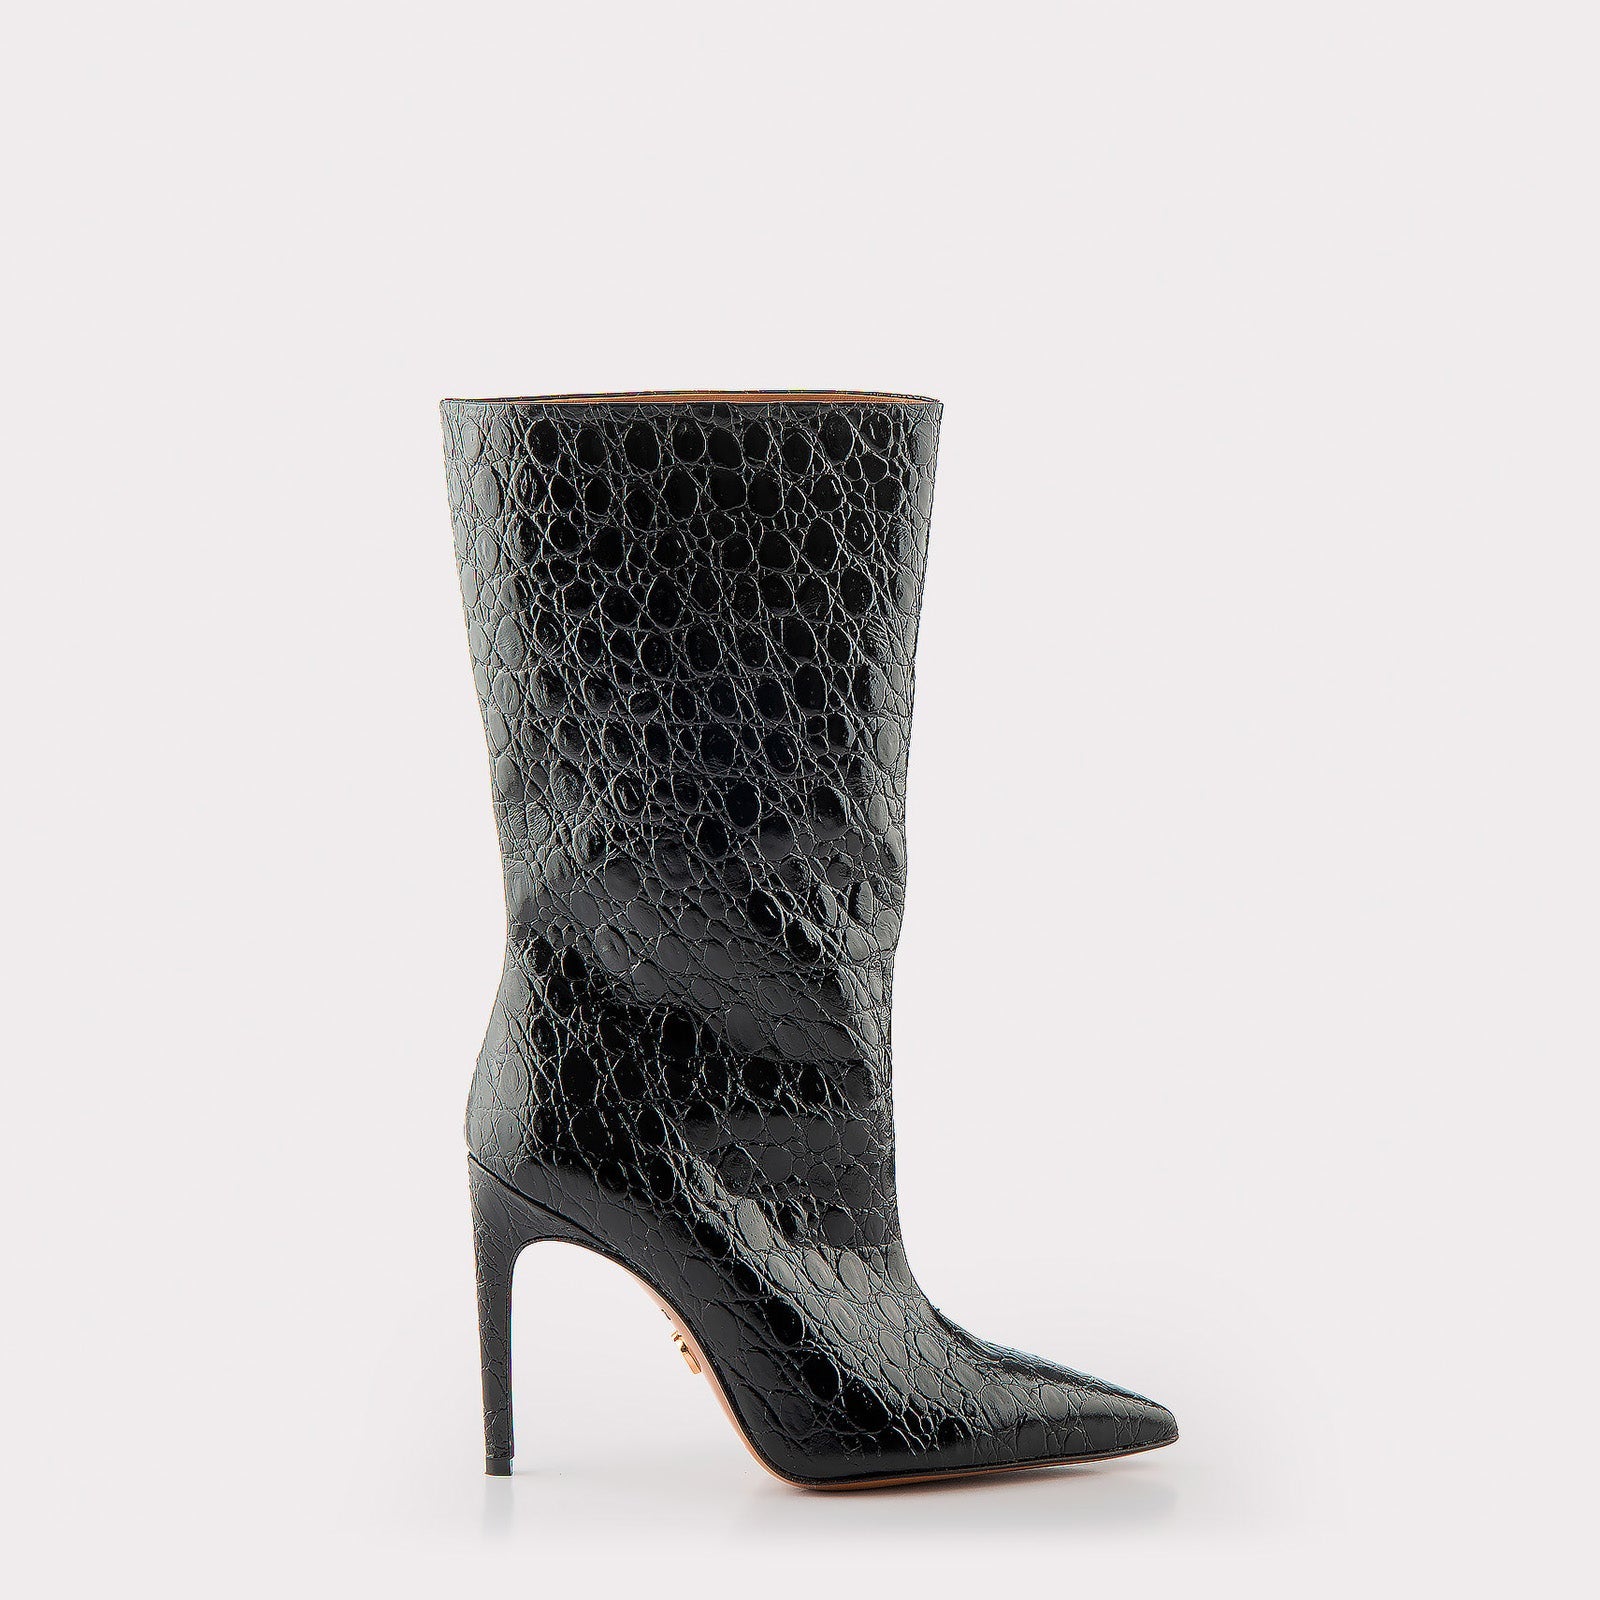 ANNIE 01 BLACK CROCO EMBOSSED LEATHER BOOTS